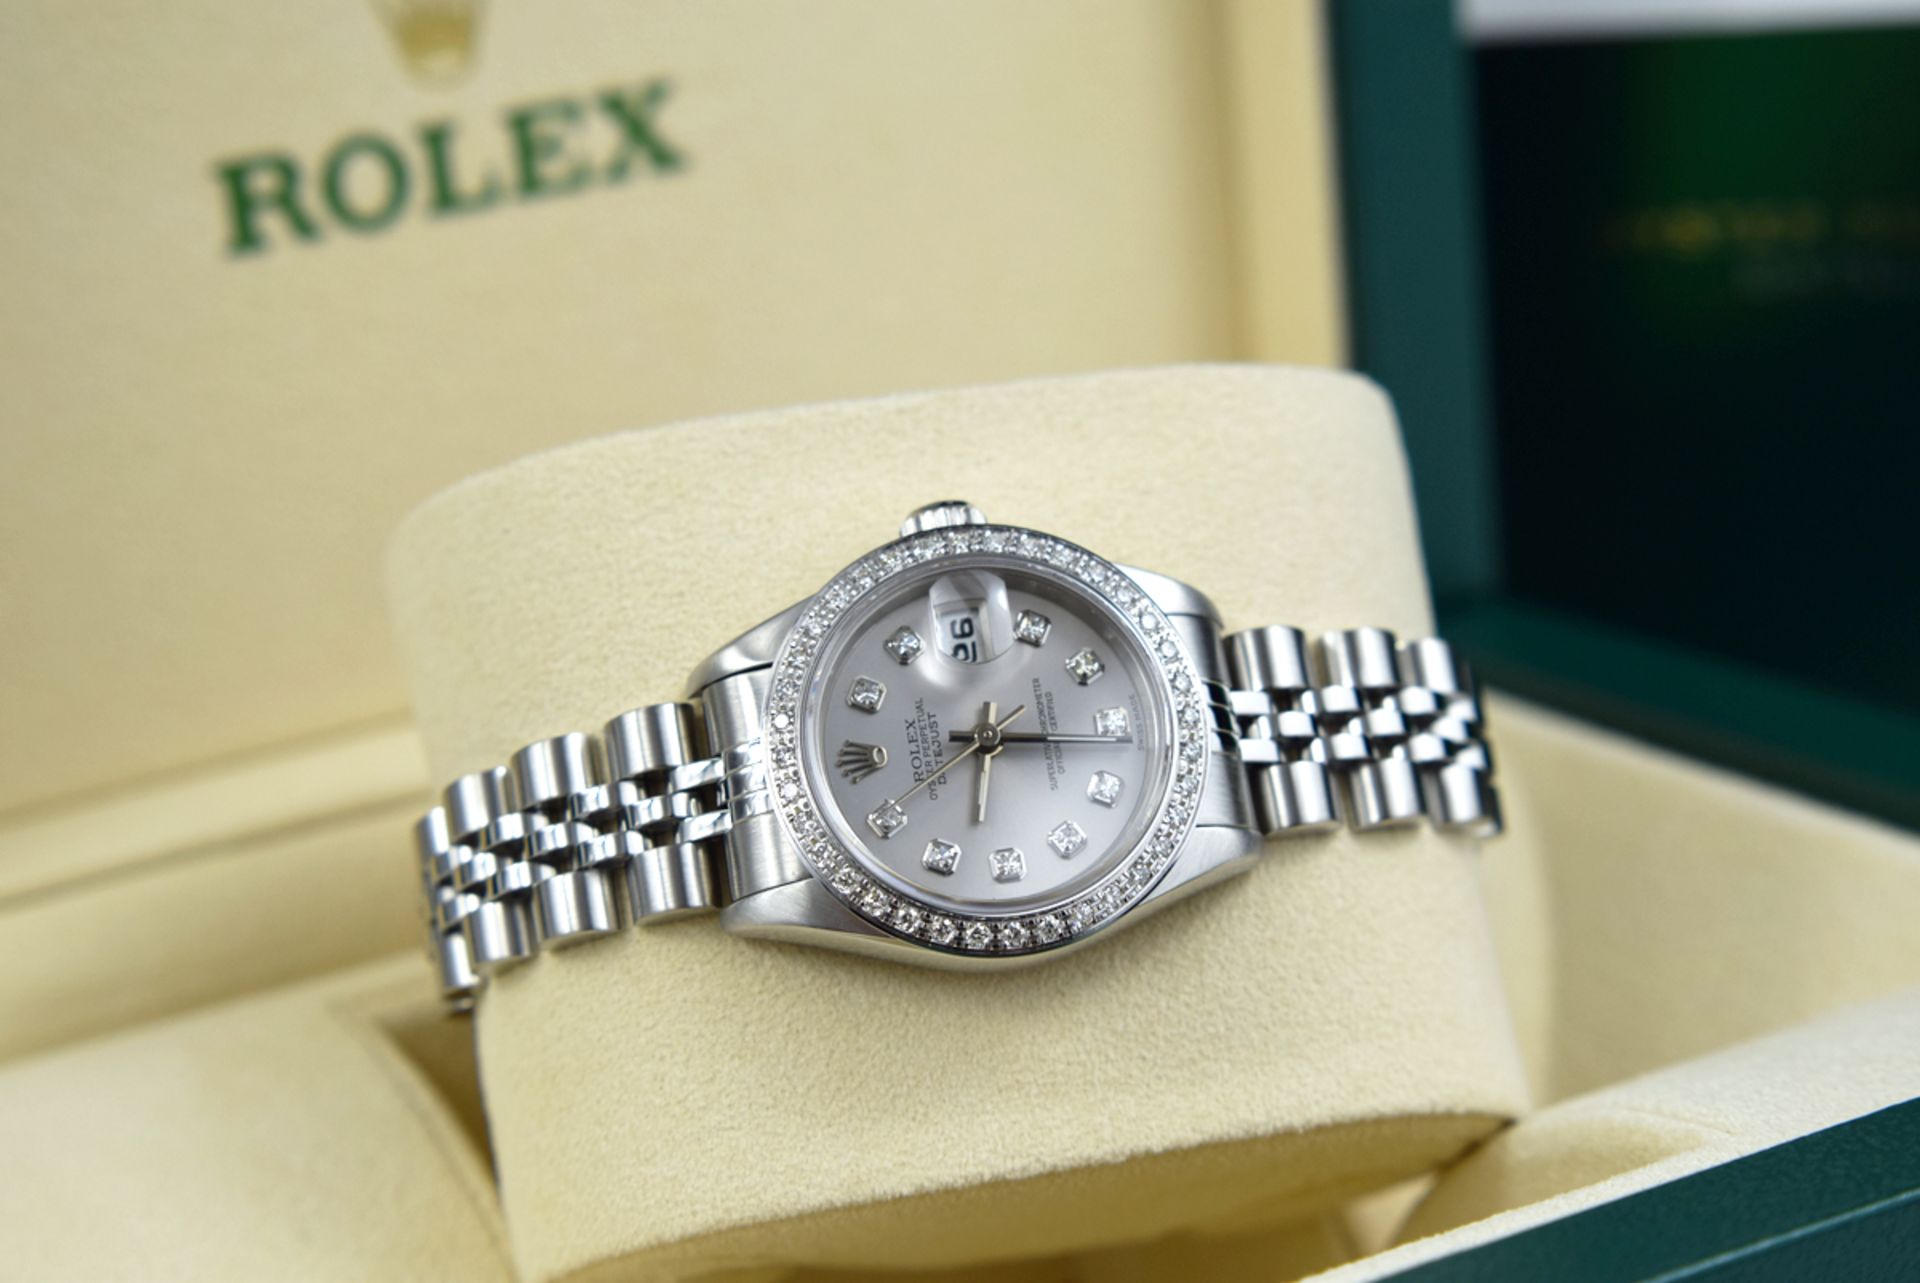 ROLEX *DIAMOND* LADY DATEJUST - 18K WHITE GOLD & STEEL WITH SILVER GREY DIAMOND DIAL - Image 6 of 12